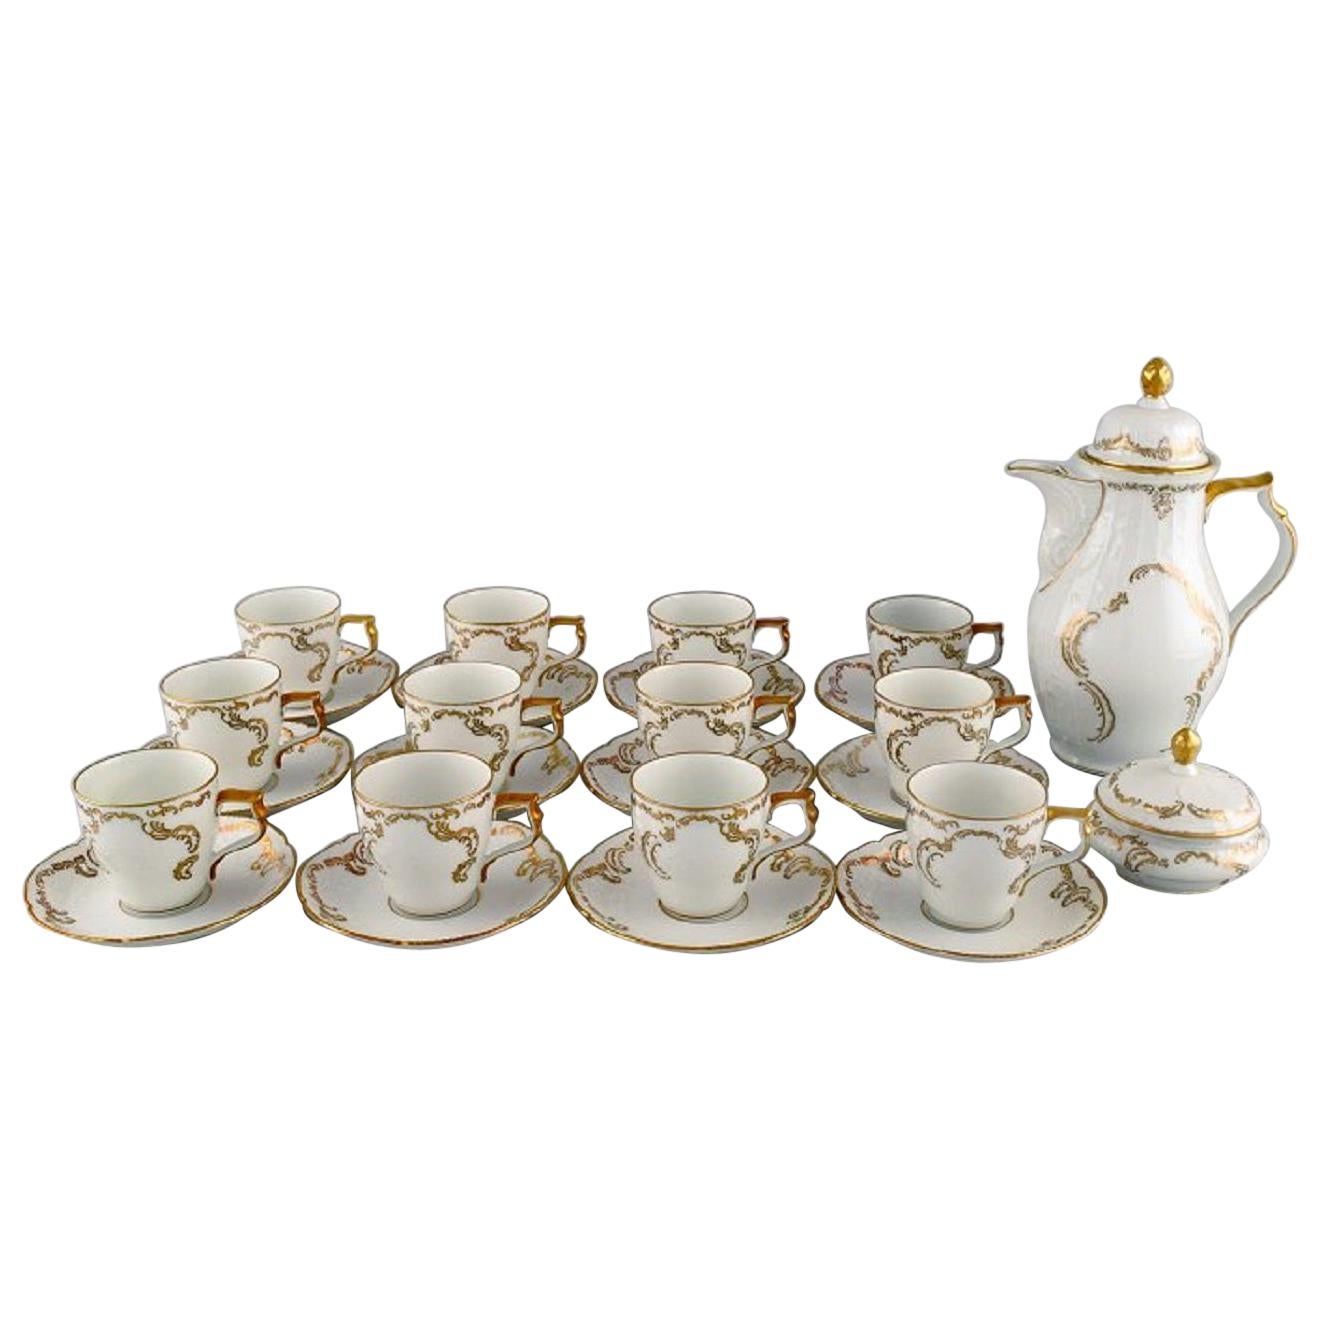 Rosenthal, Germany, Porcelain Coffee Service with Gold Decoration for 12 People